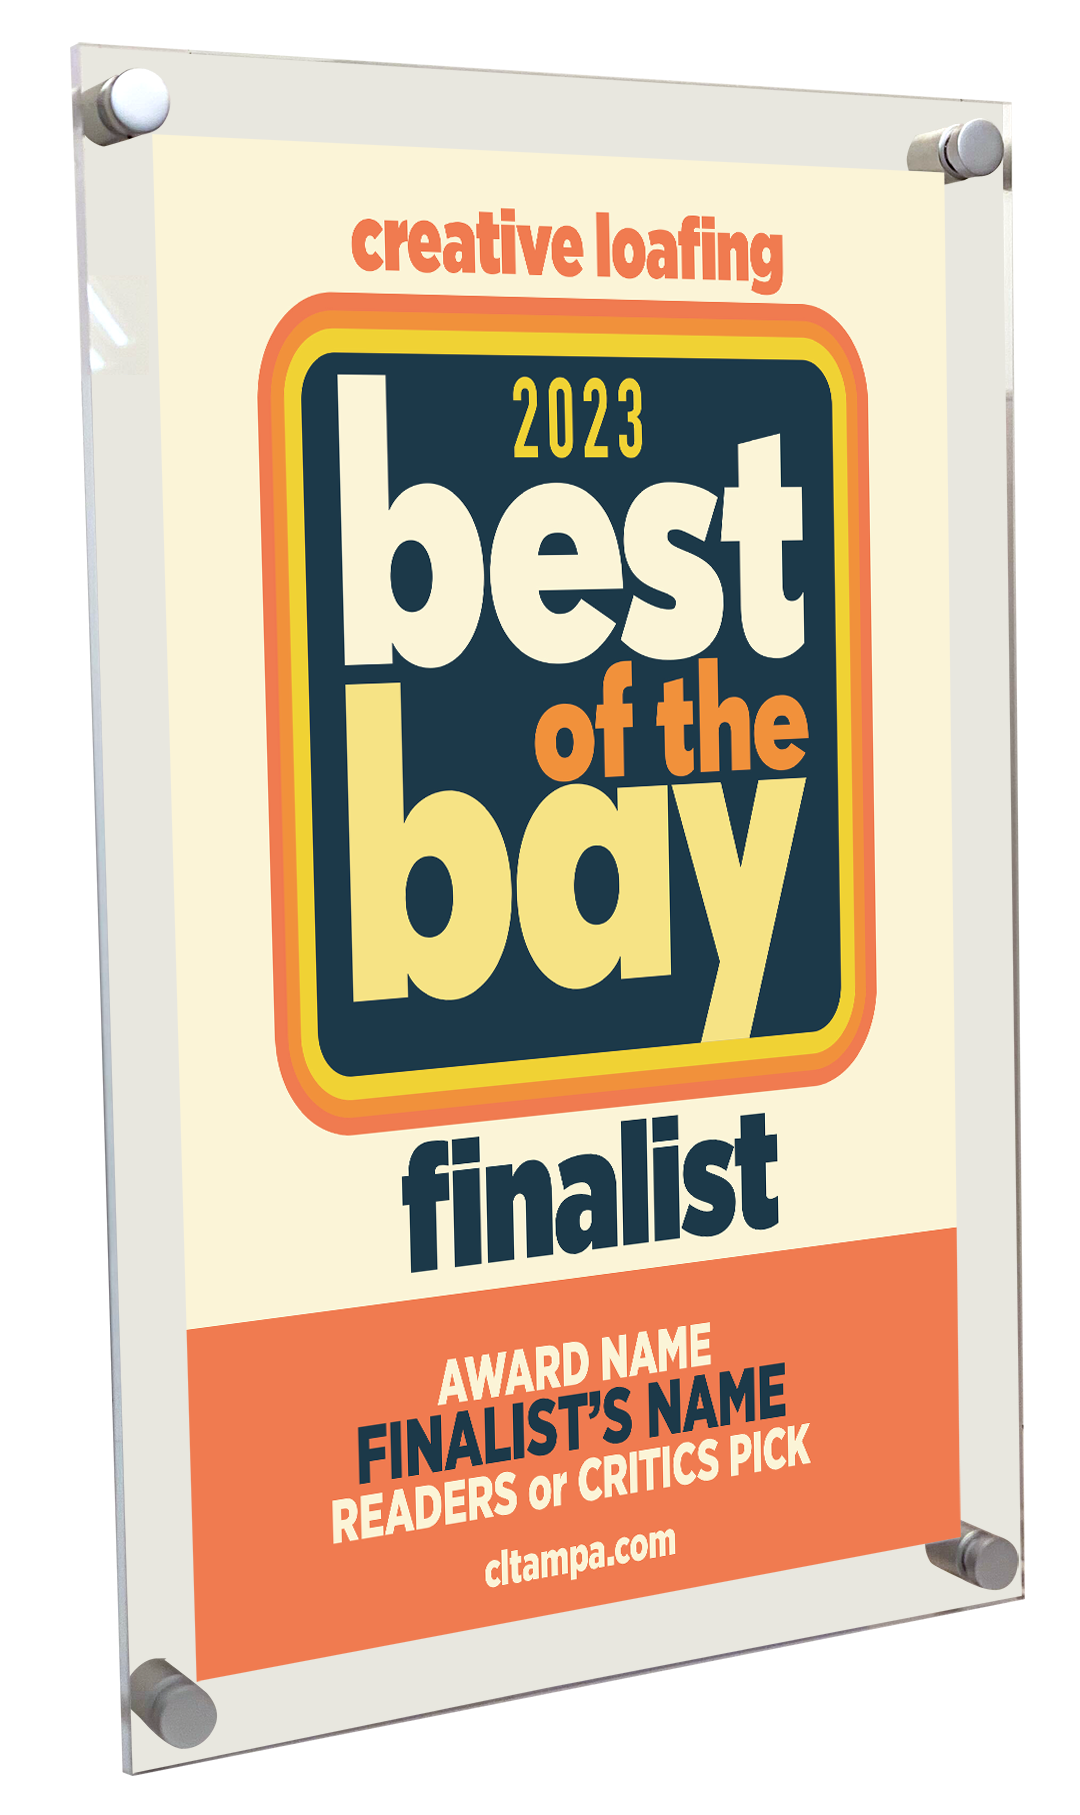 CL Tampa Bay Best of the Bay Plaque | Acrylic Standoff